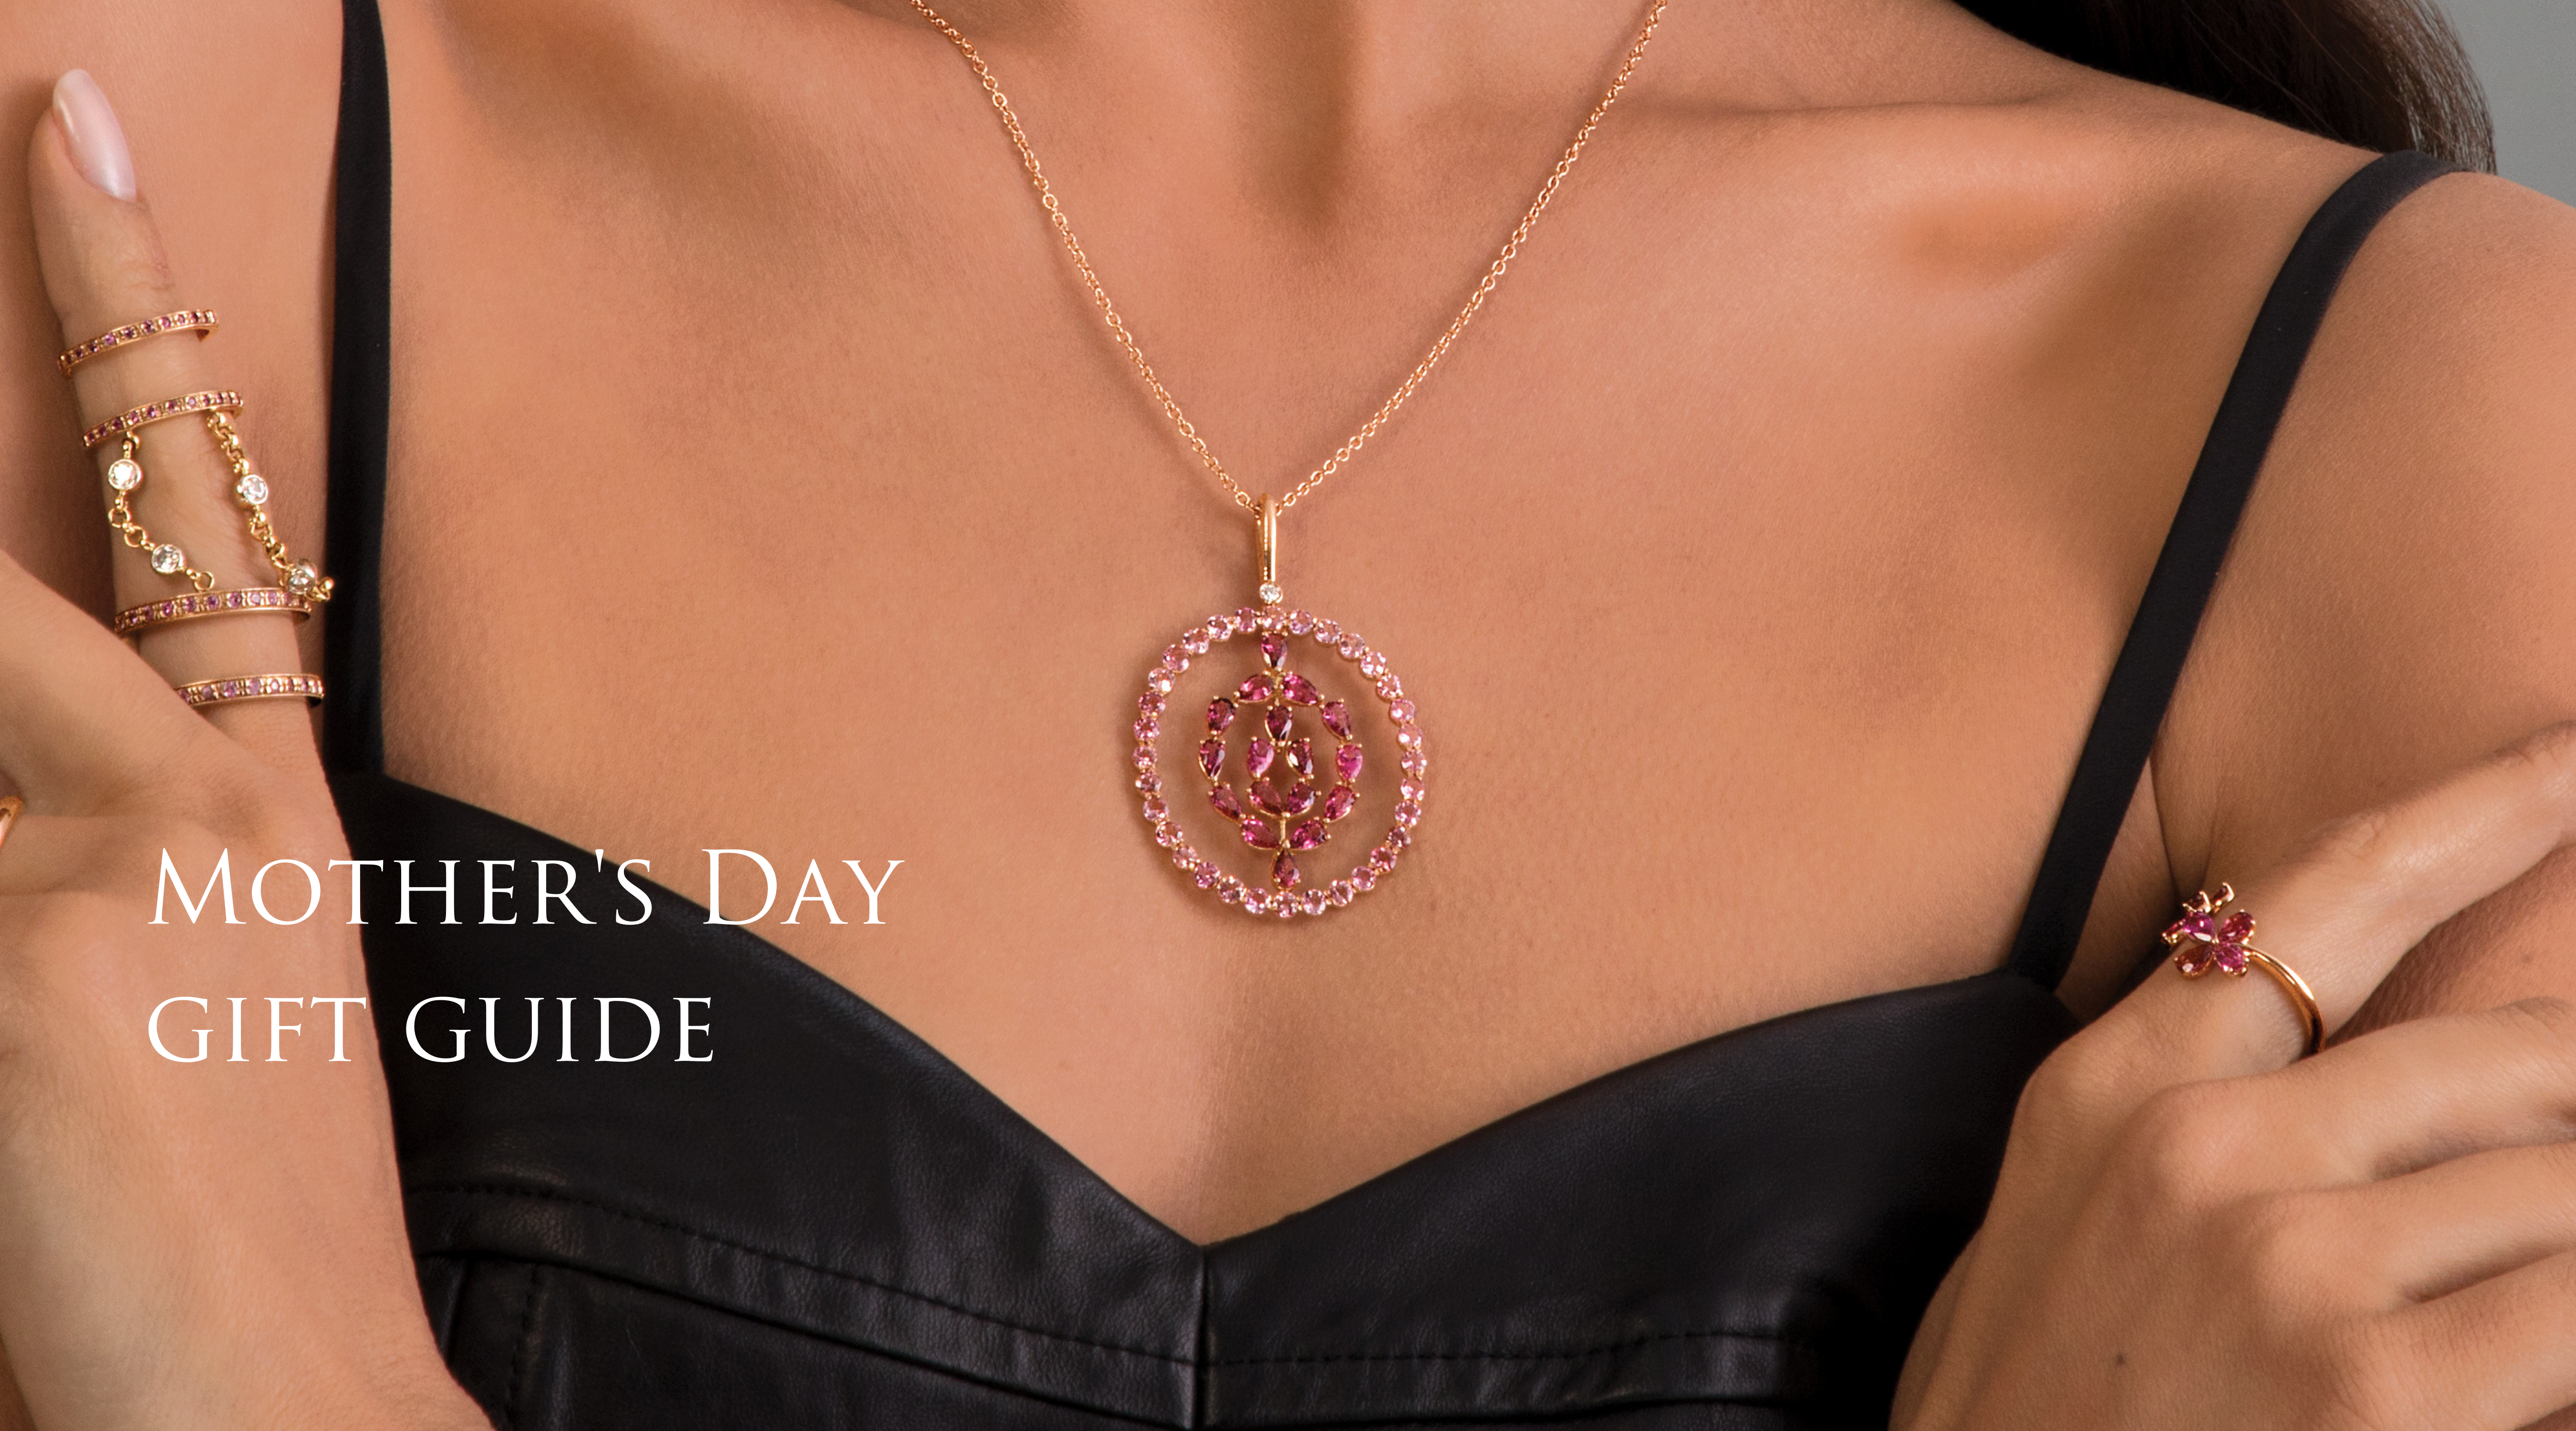 mother's day gift guide: necklaces your mom will love